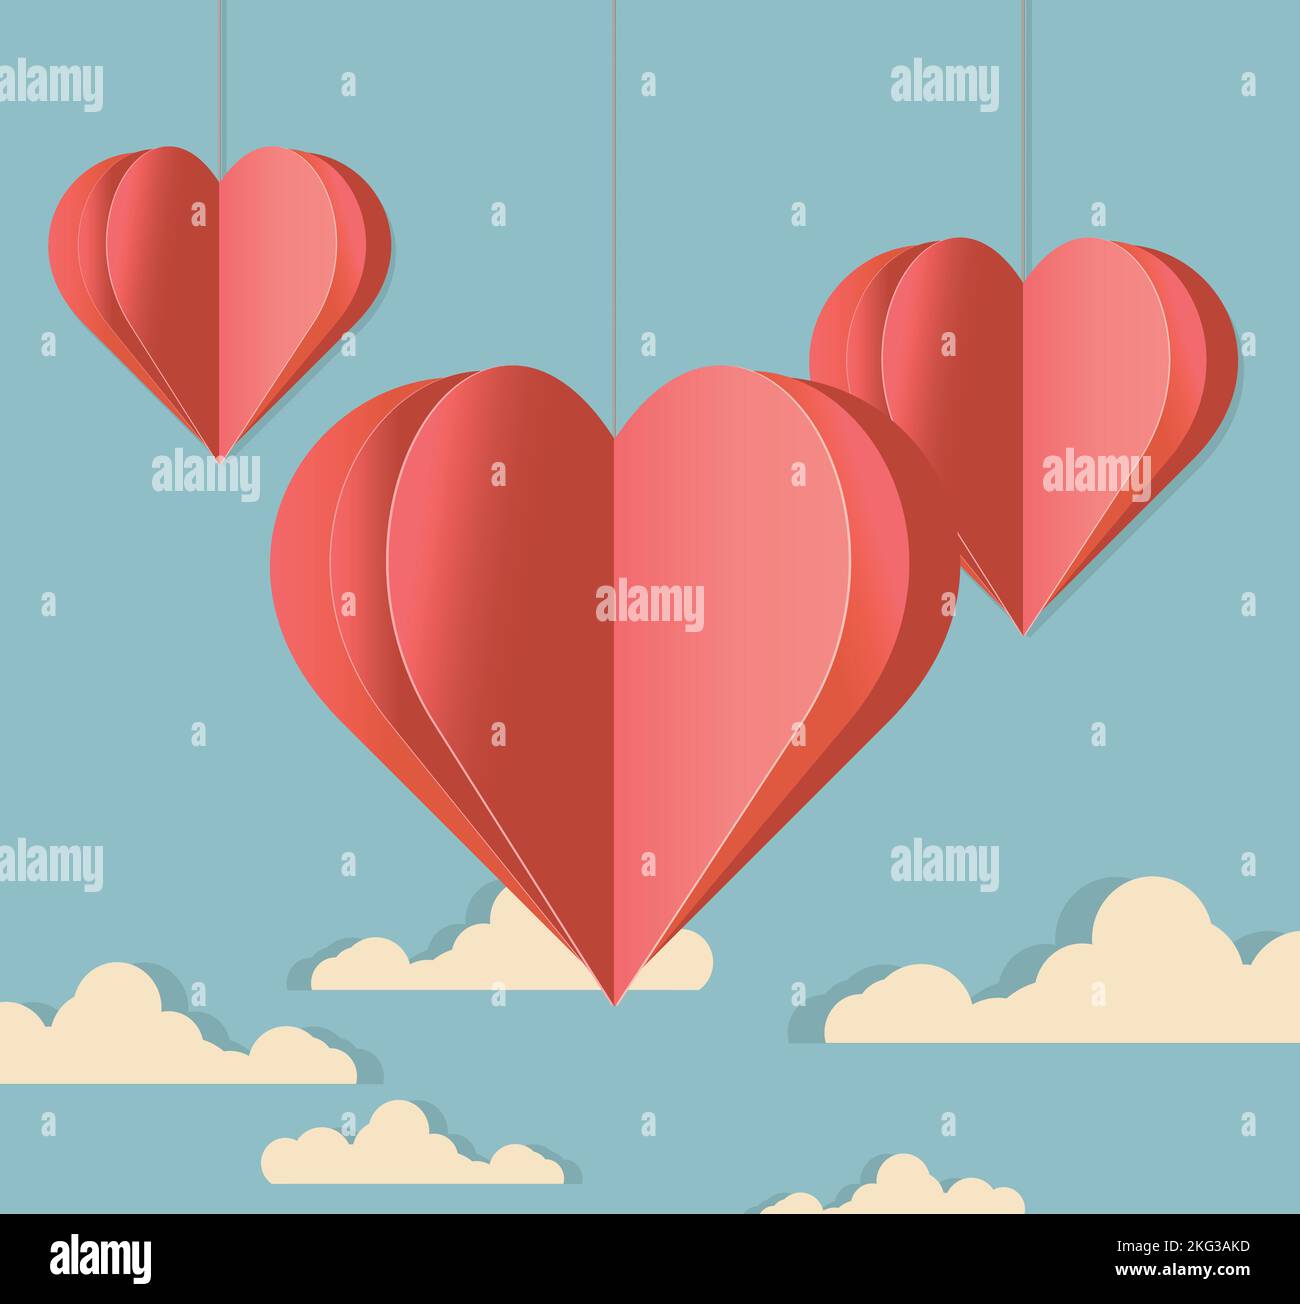 illustration of three red hearts hanging on a blue sky and white clouds Stock Vector